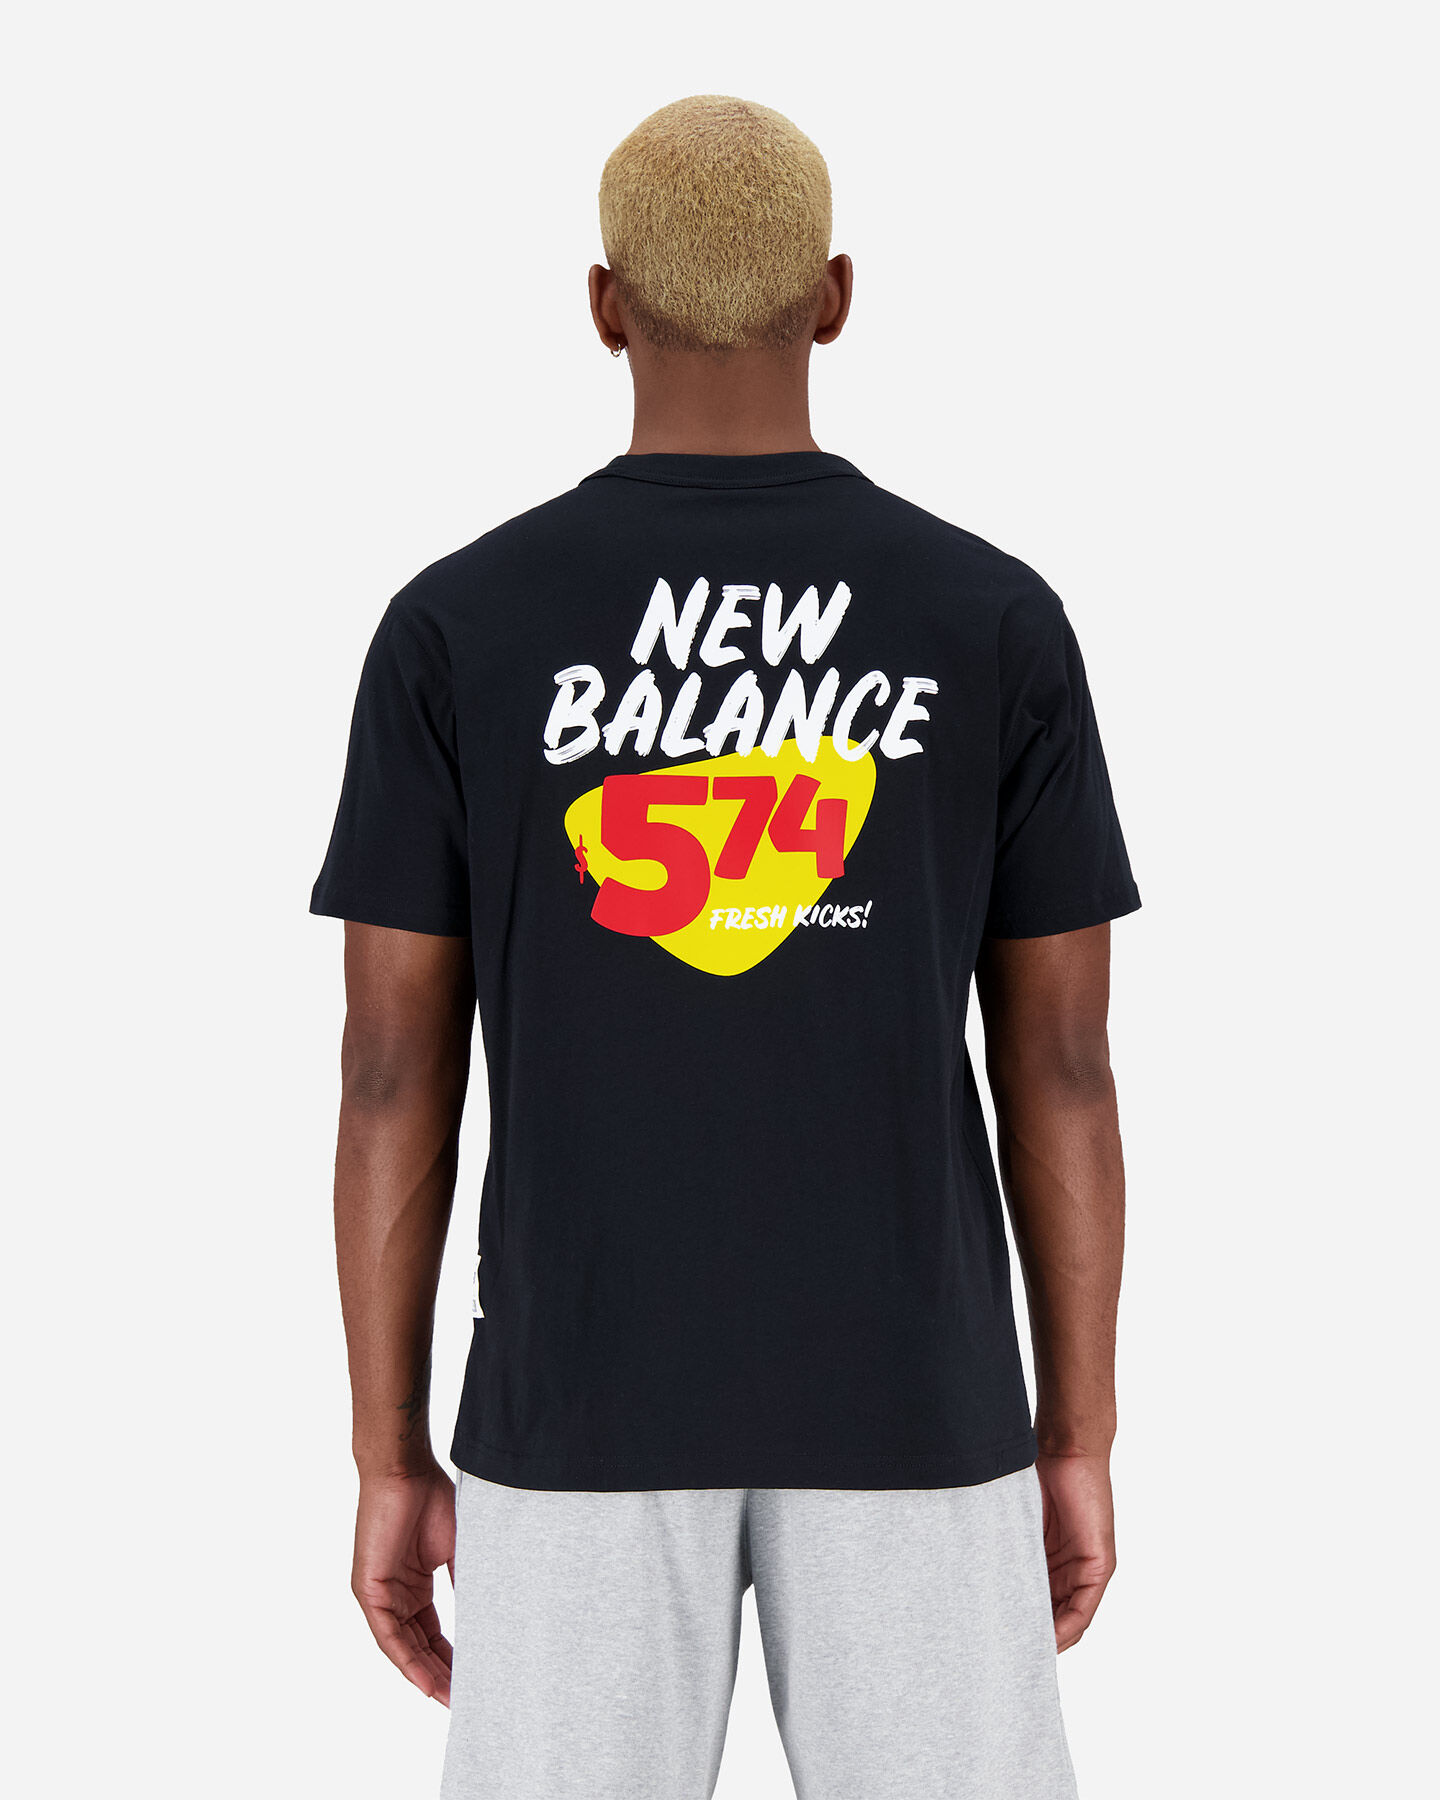  T-Shirt NEW BALANCE 574 PACK BIG GRAPHIC M S5533710|-|S* scatto 1